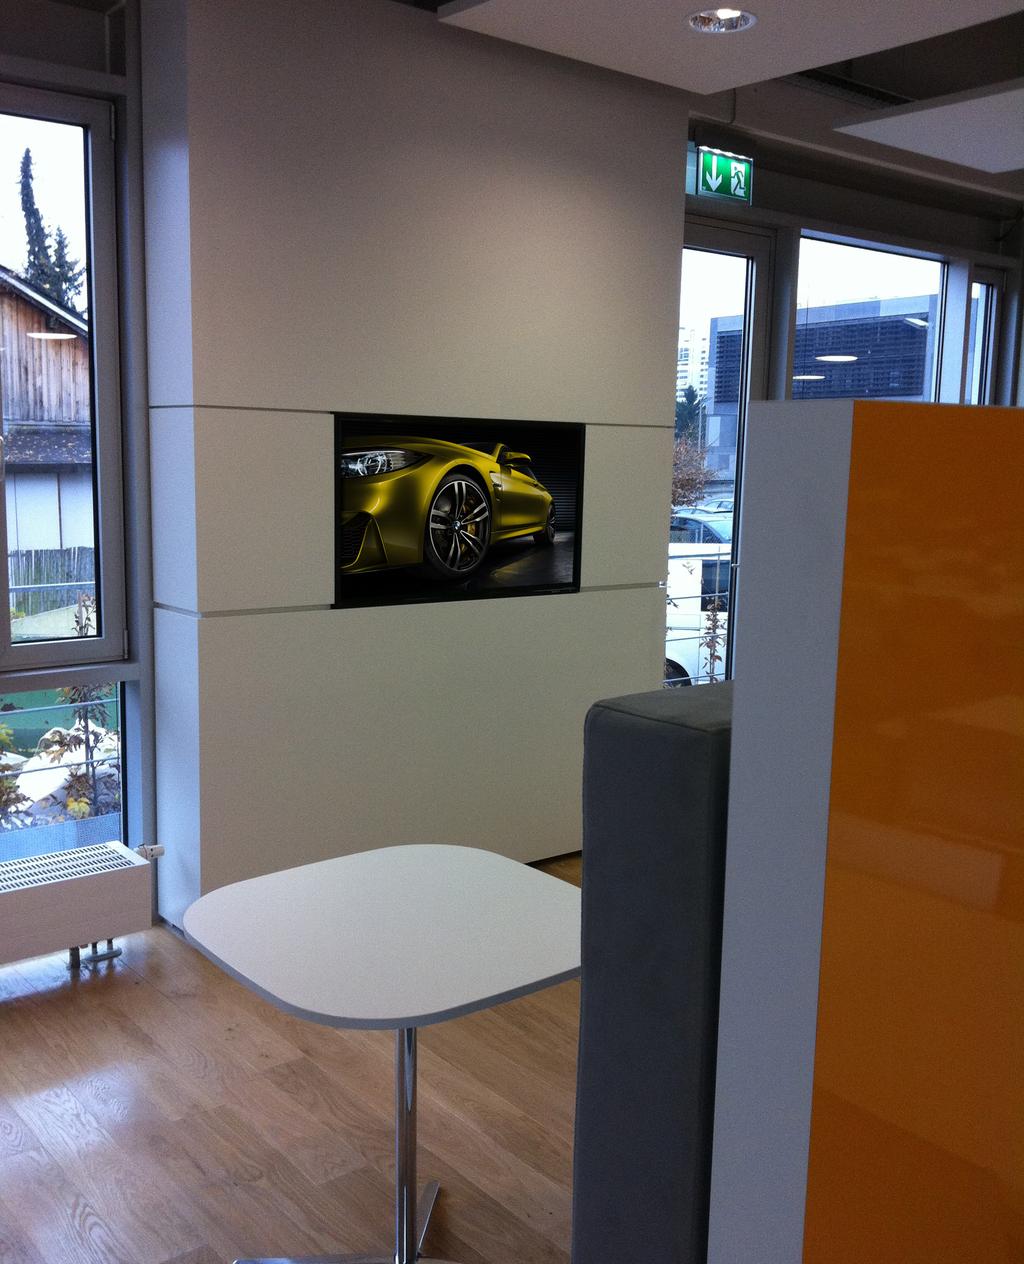 The installation The BMW Group has installed Sharp s screens across its offices and manufacturing facilities.